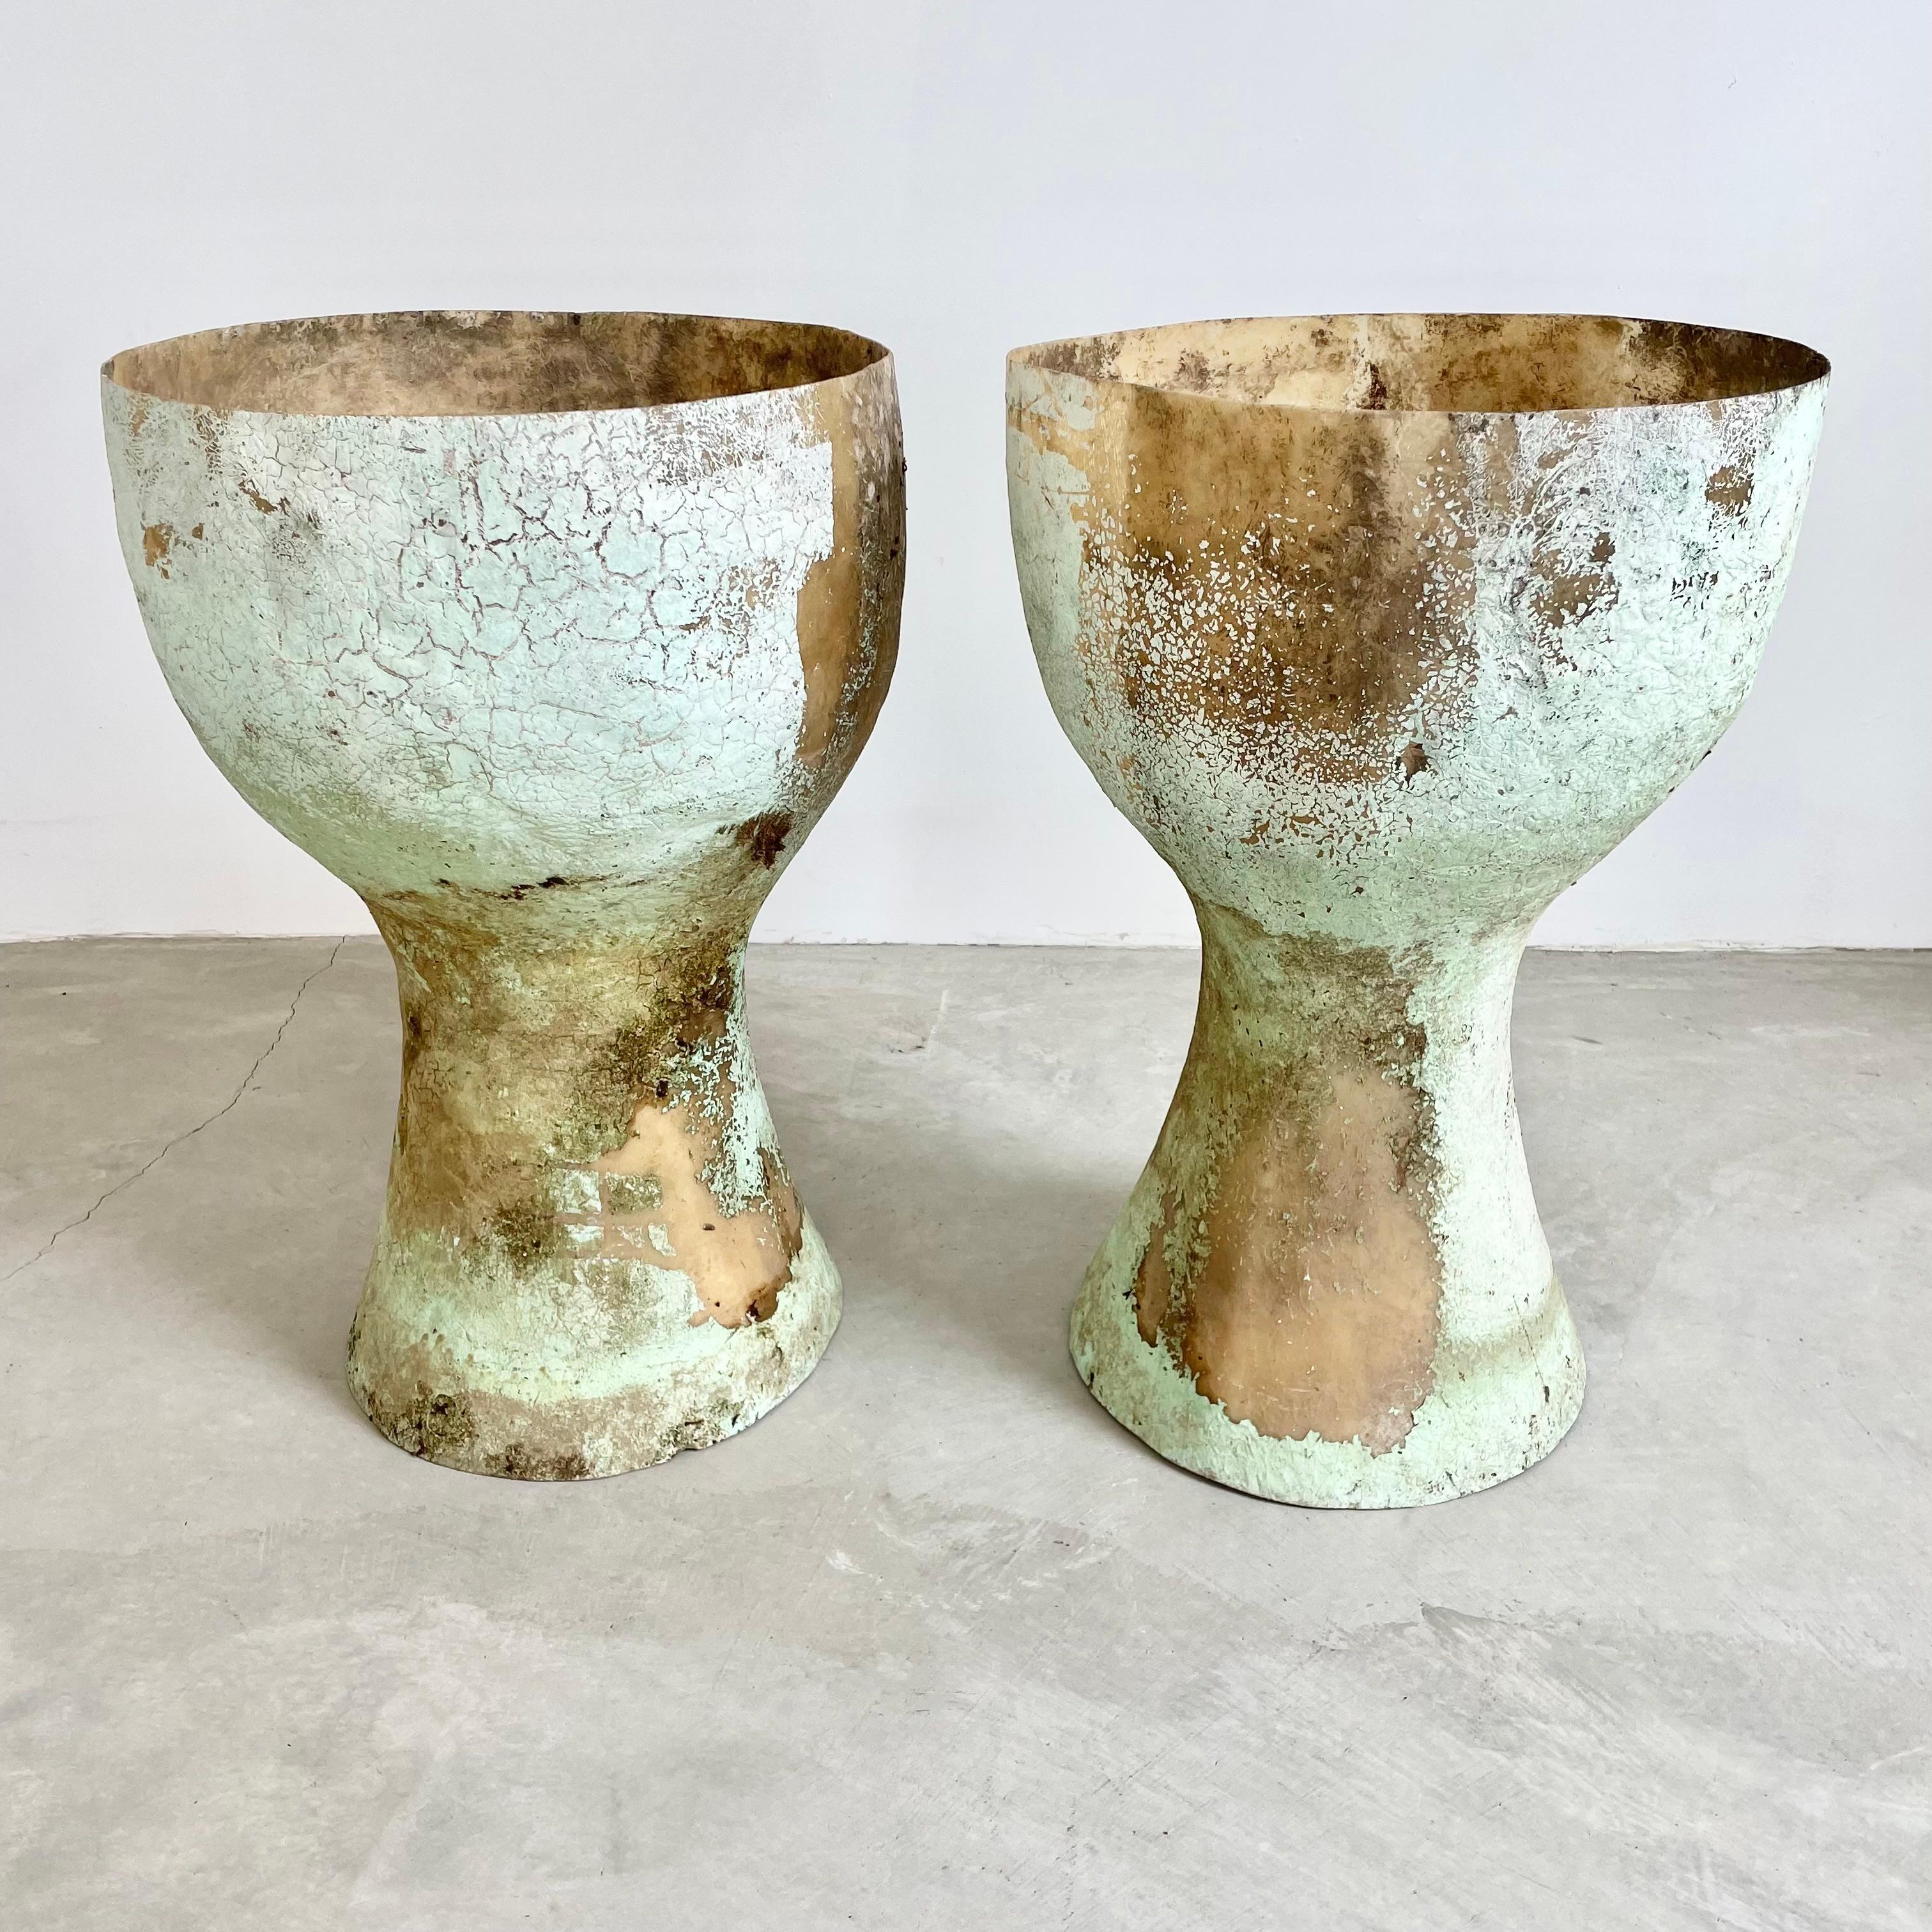 Gorgeous set of monumental fiberglass vases from Belgium, circa 1960s. Both vases are painted a mint green and have a different but equally unique patina. Amazing presence. Being very light and having no base, these planters are meant for plants to